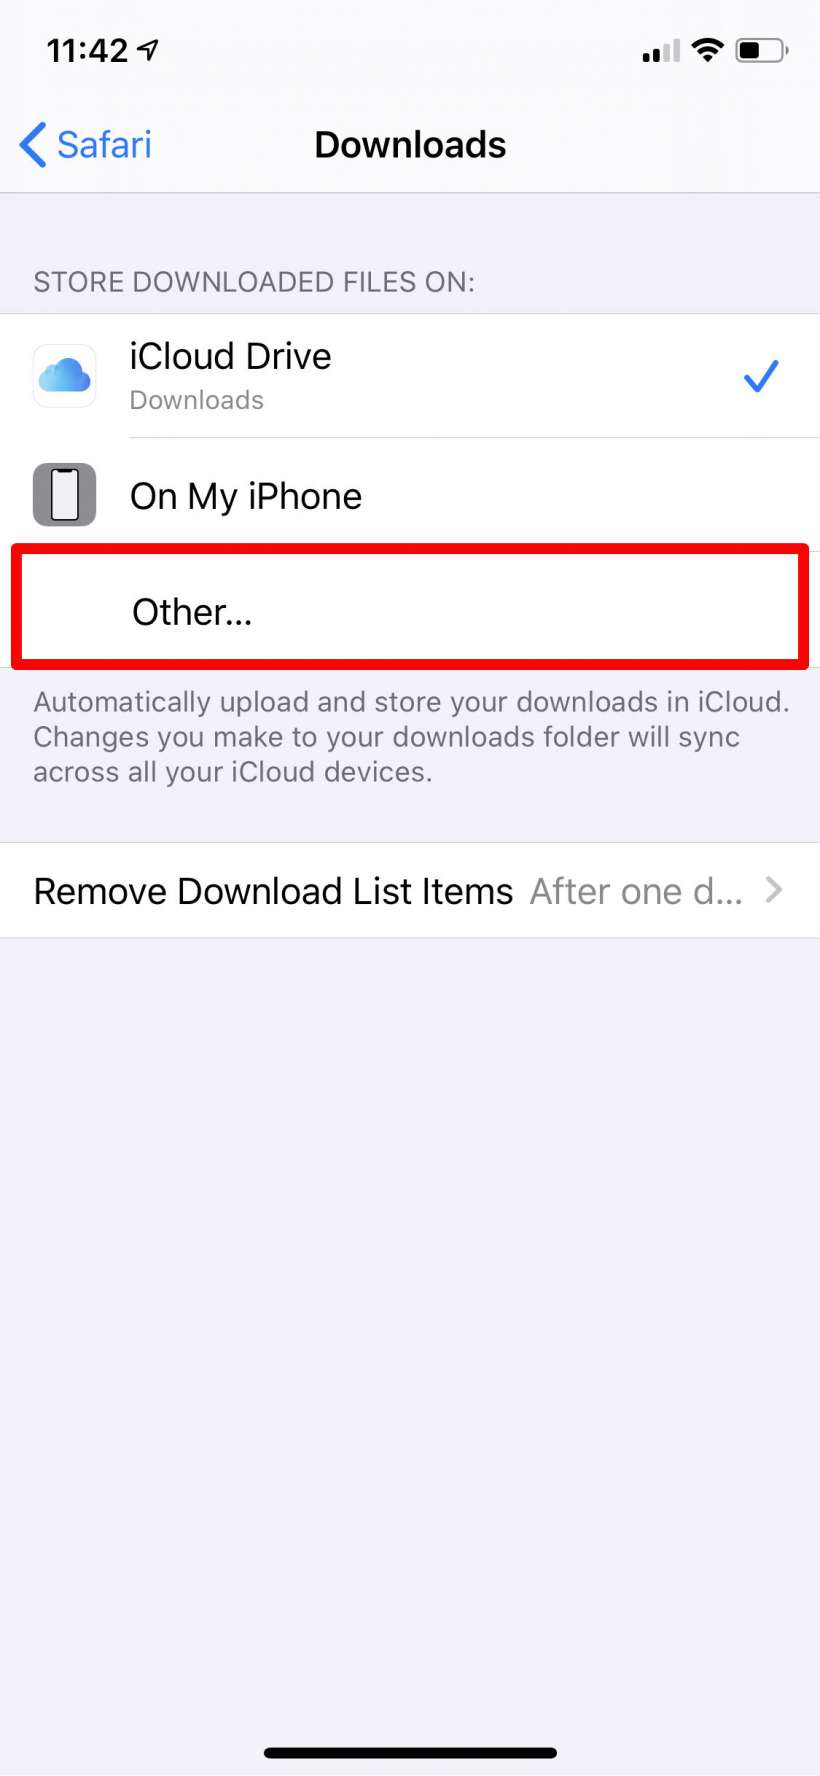 How to use Safari's download manager on iPhone and iPad.